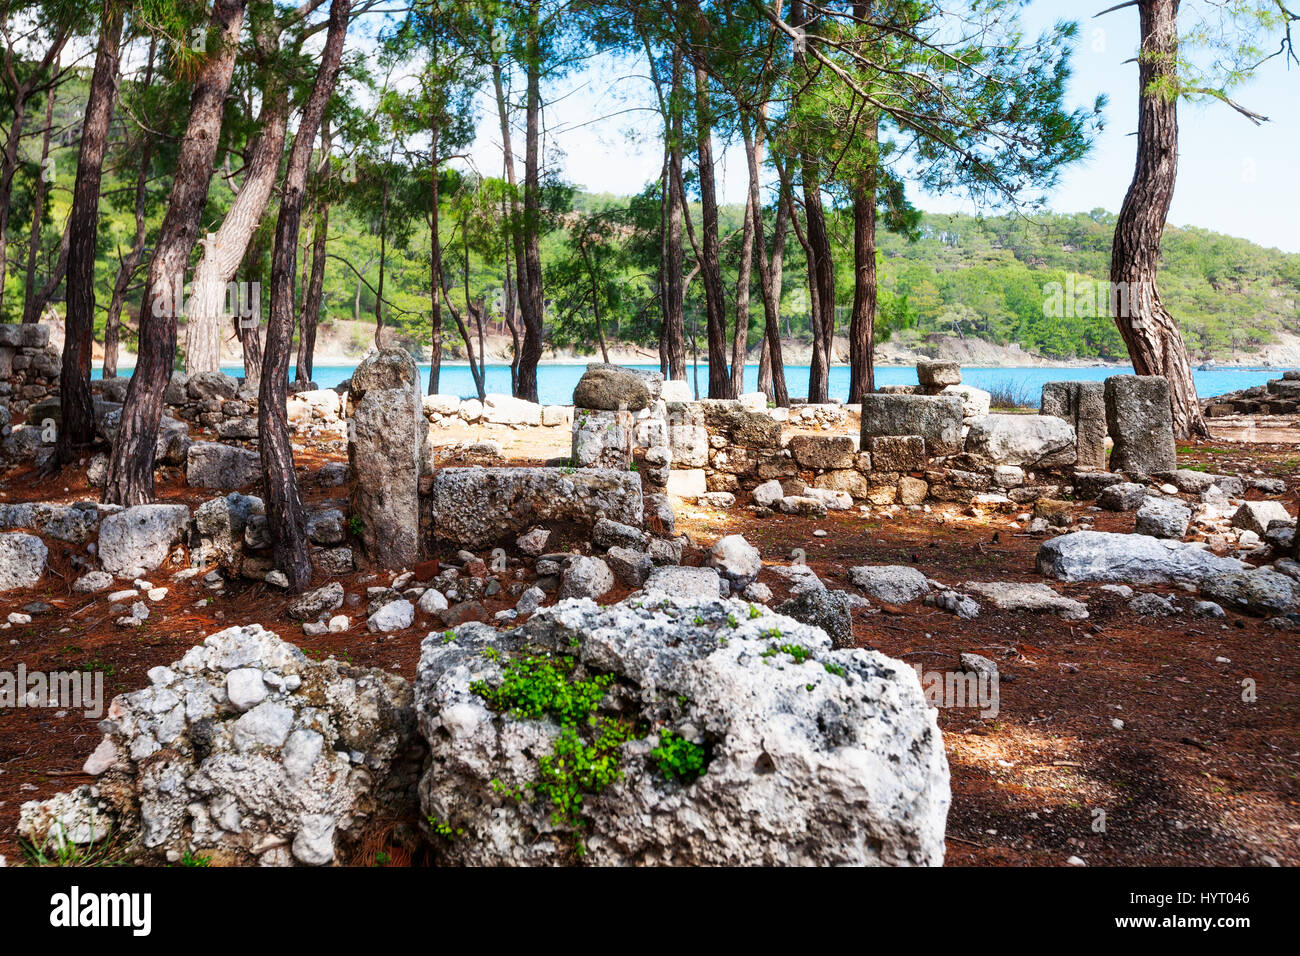 Spring landscape with beach, pines and ruins of ancient town Phaselis, Turkey, travel destination Stock Photo